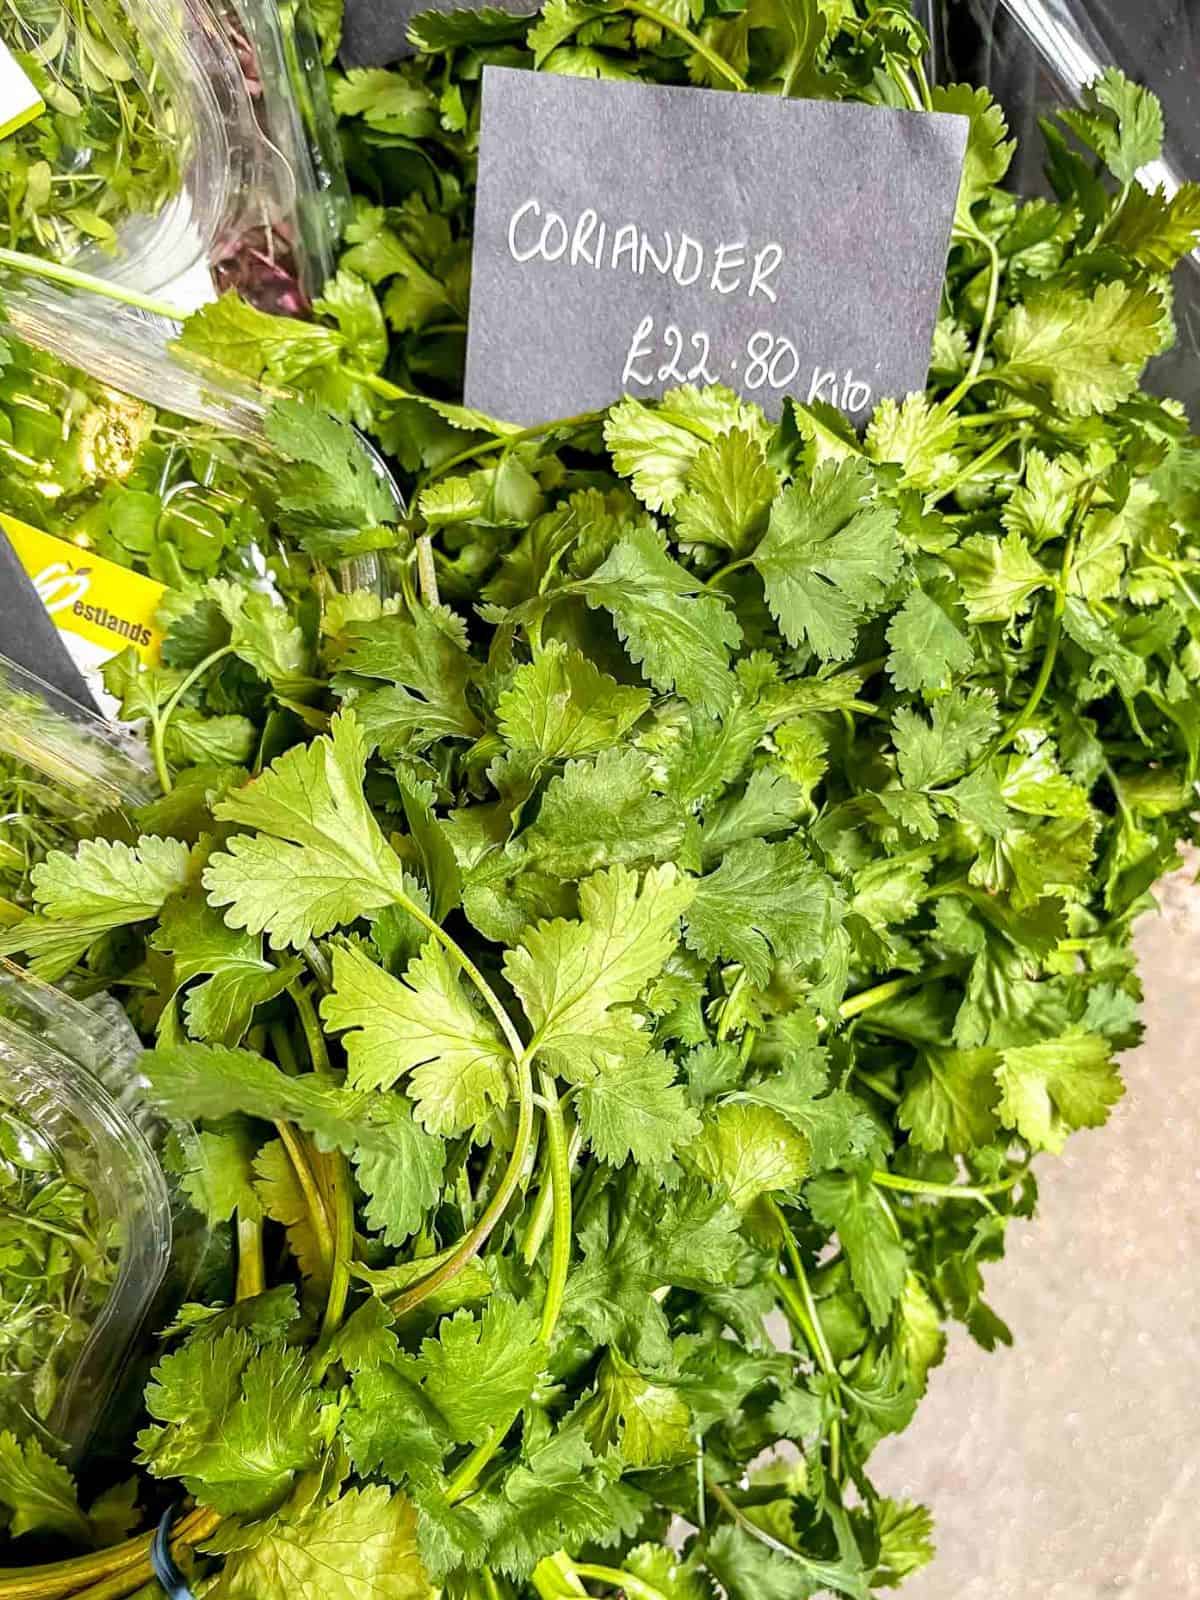 bunches of coriander with a sign saying coriander.